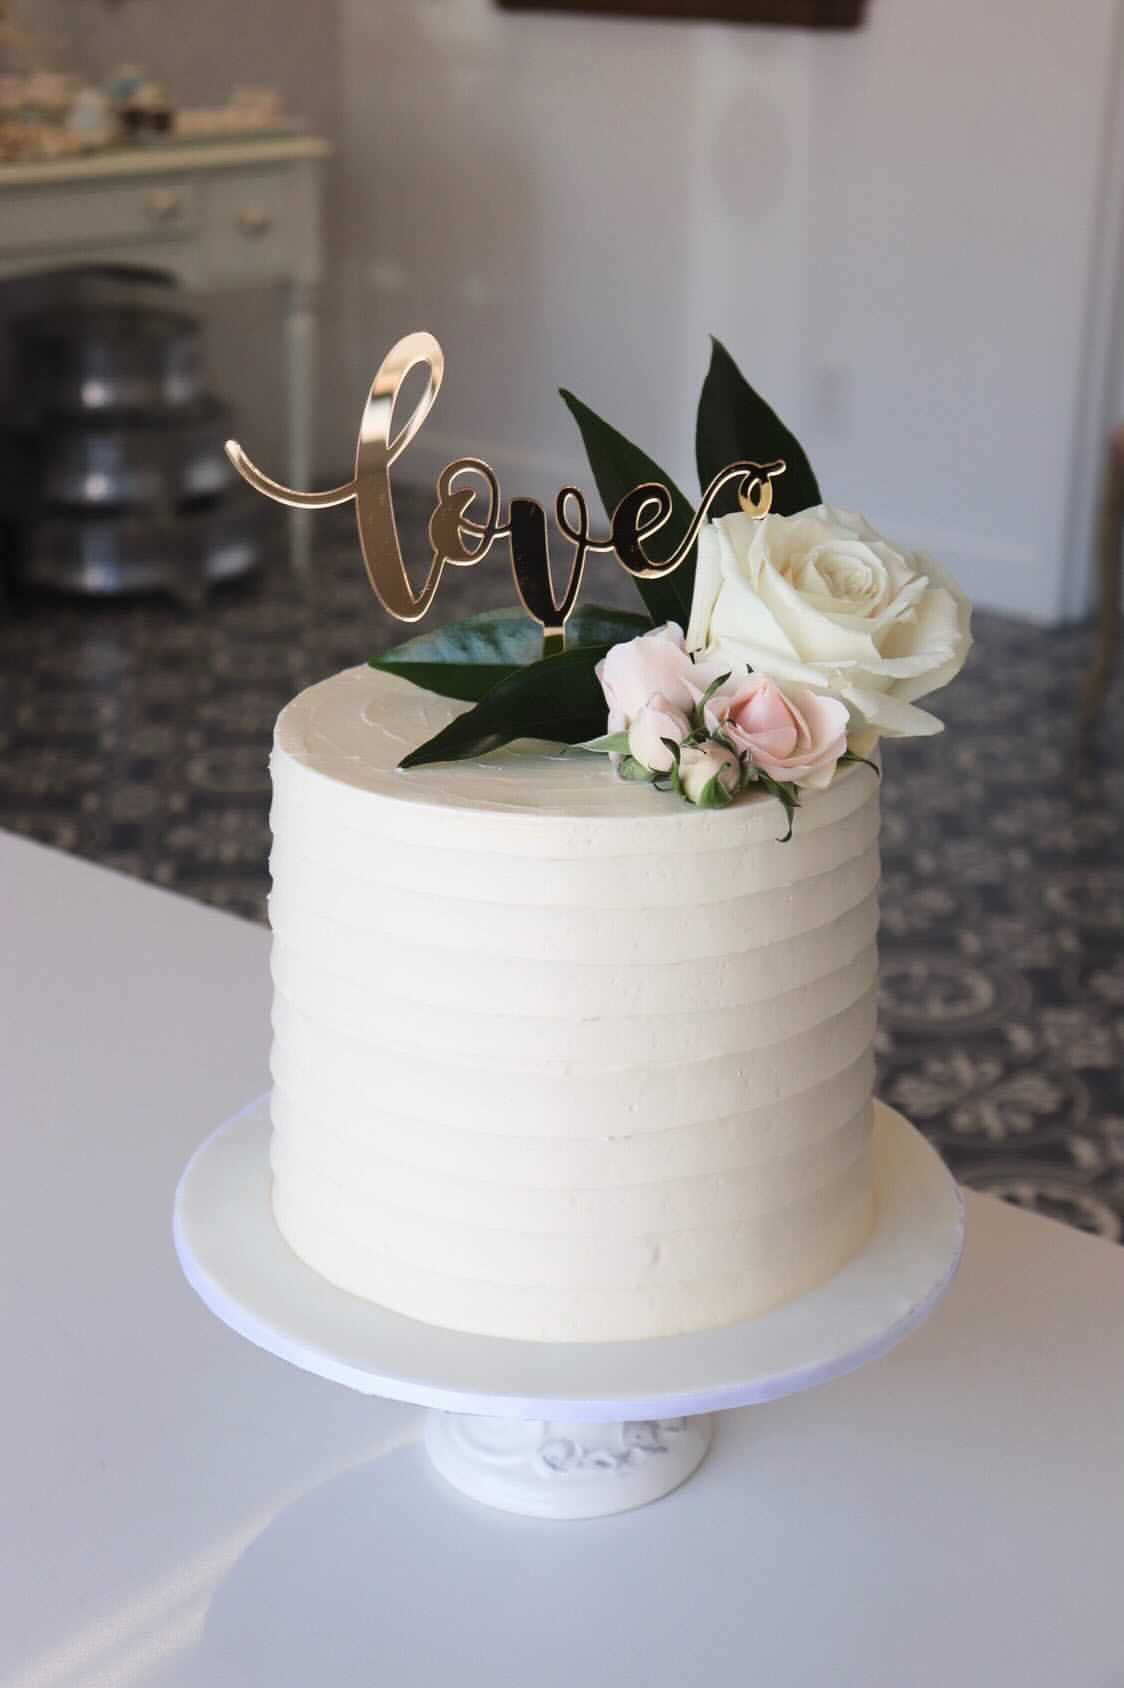 Topper: Gold Mirror Acrylic
Cake: Patisserie V. Marie